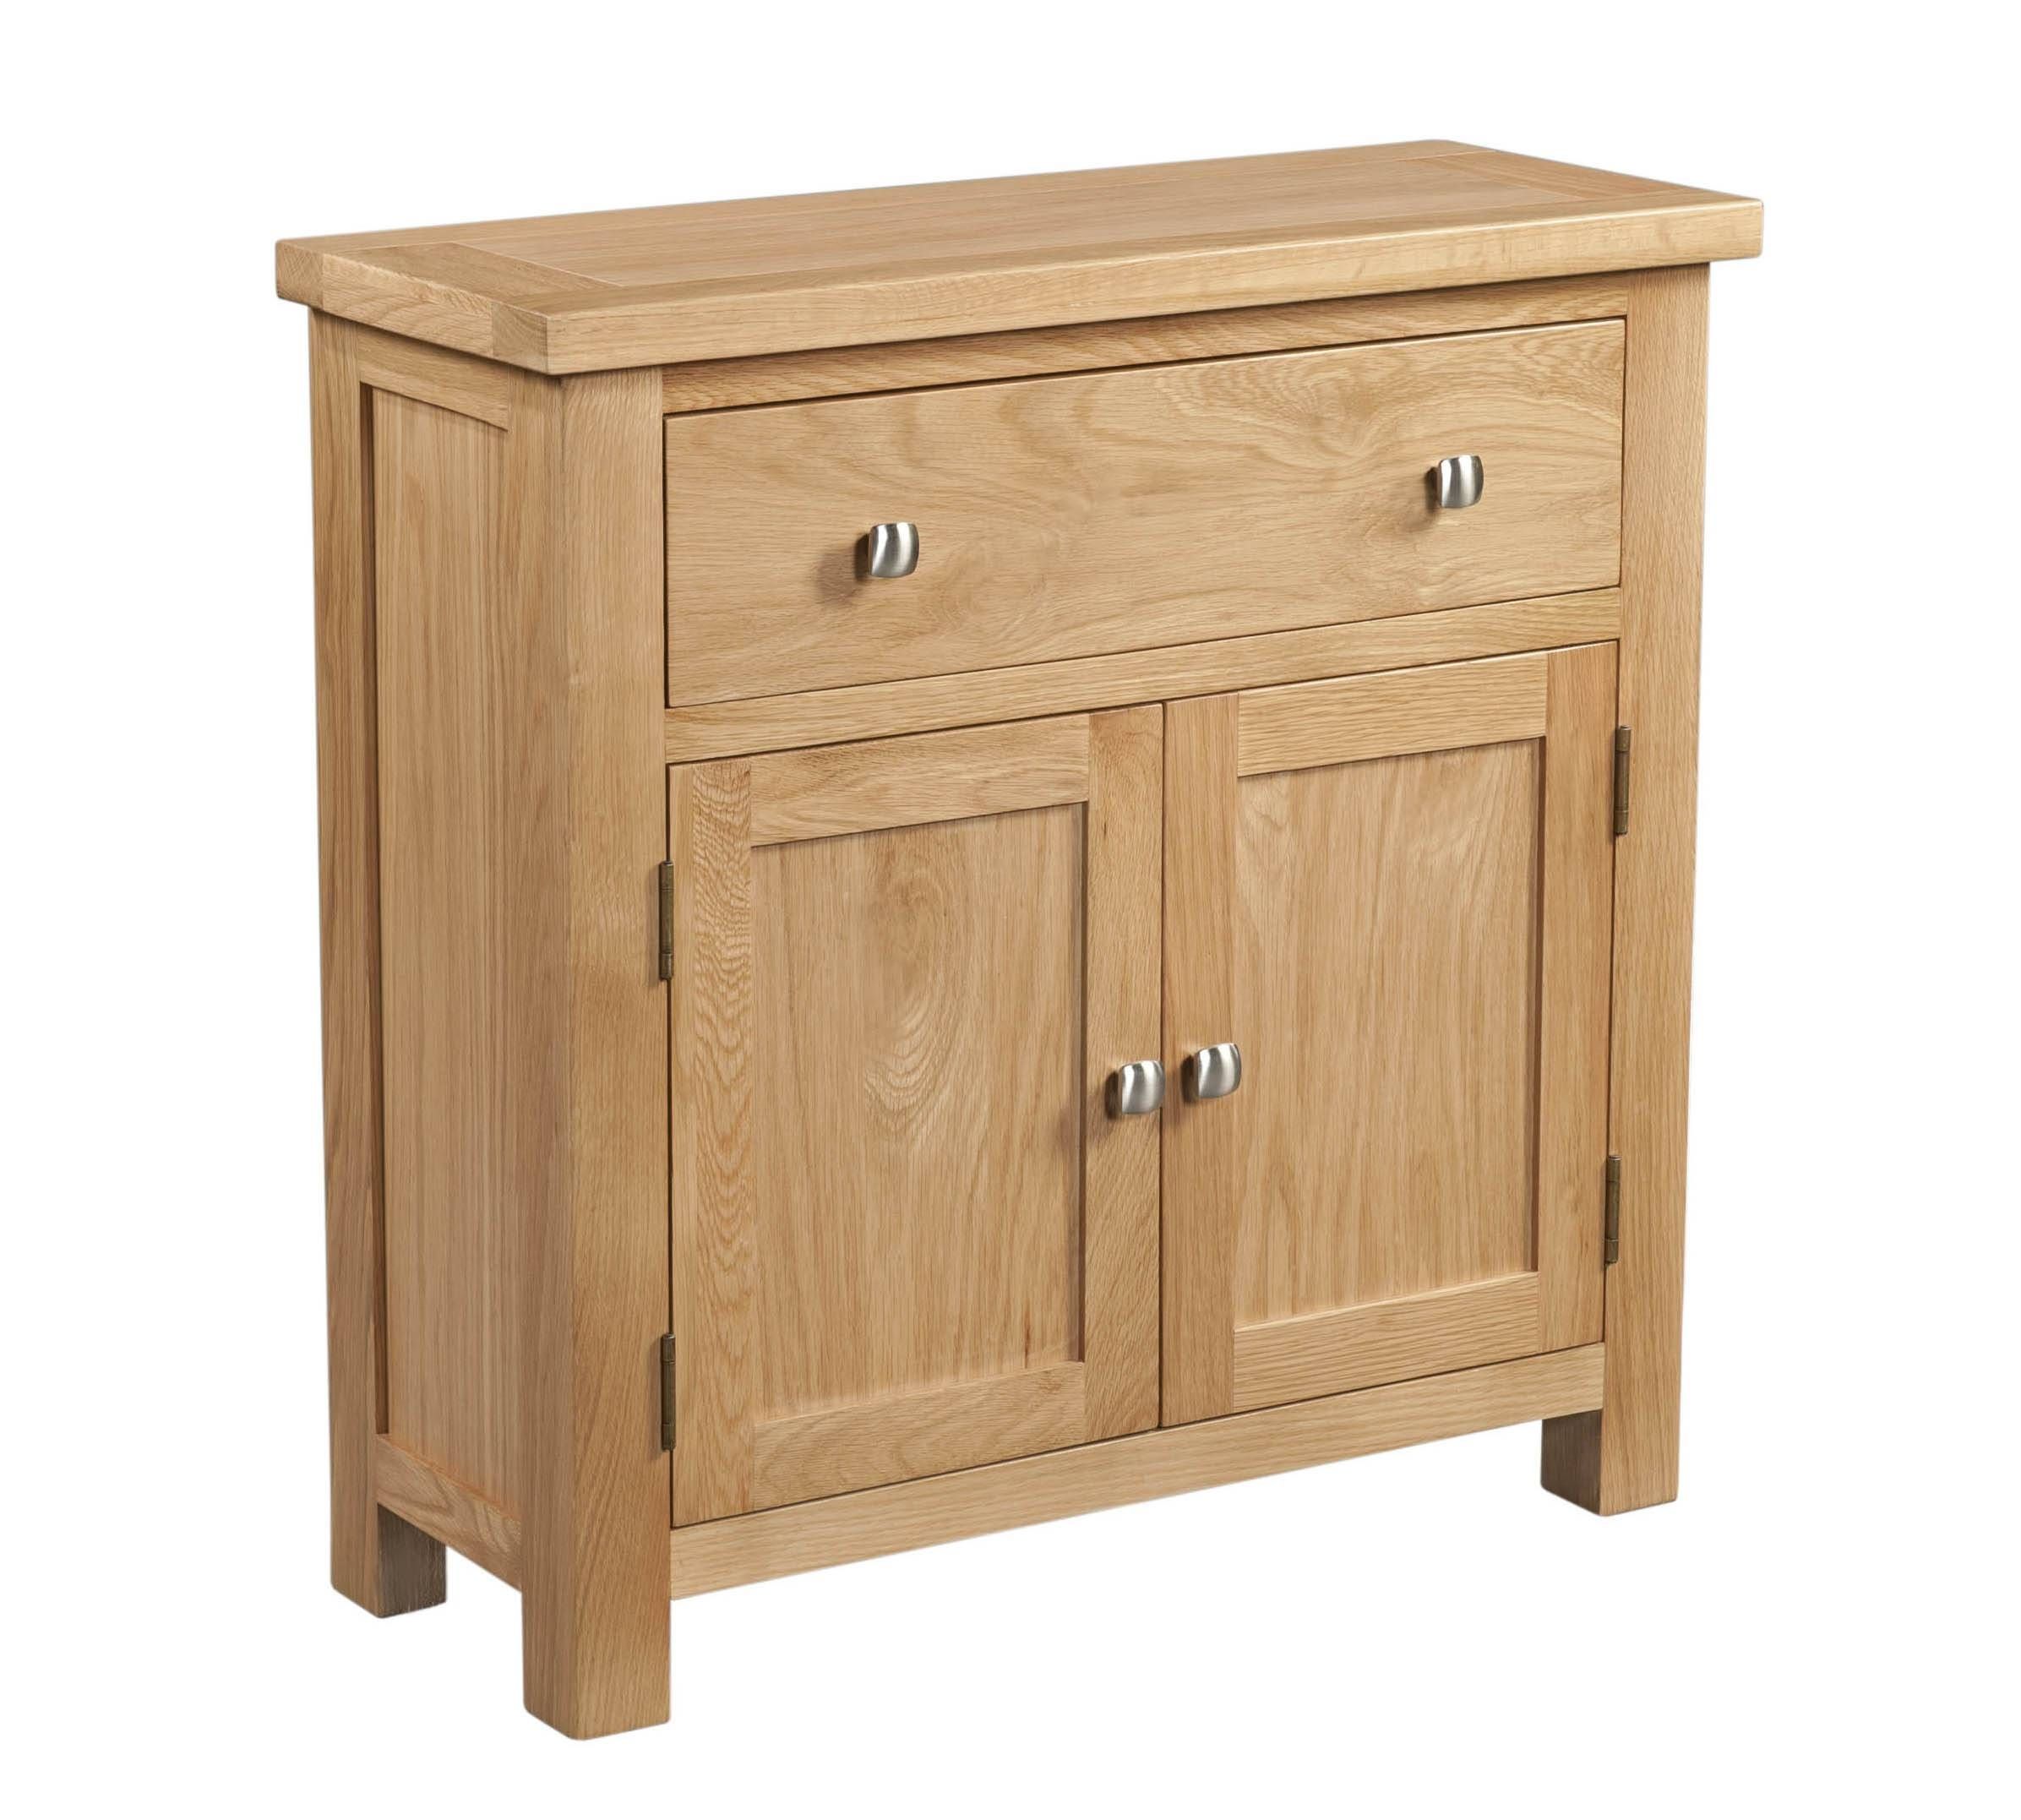 Dorset Small Oak Sideboarddorset Small Oak Sideboard – Branches Of With Regard To Small Wooden Sideboard (Photo 6 of 20)